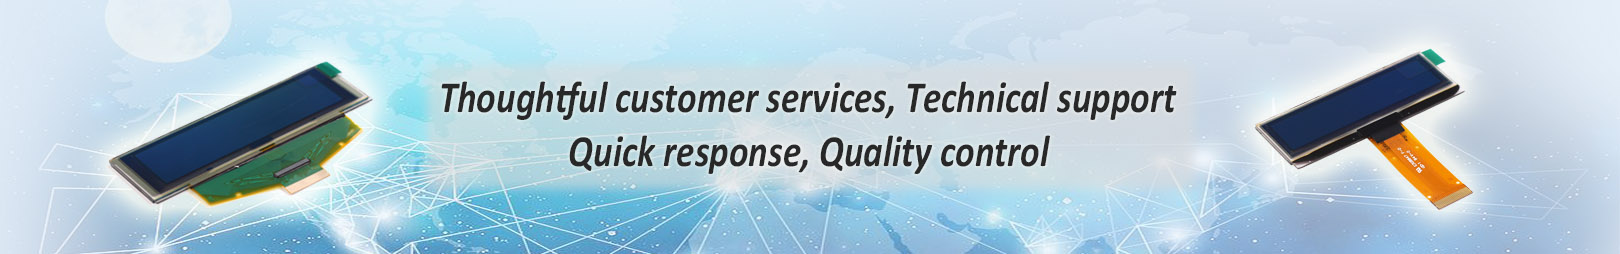 Thoughful customer services, Technical support, Quick response, Quality control